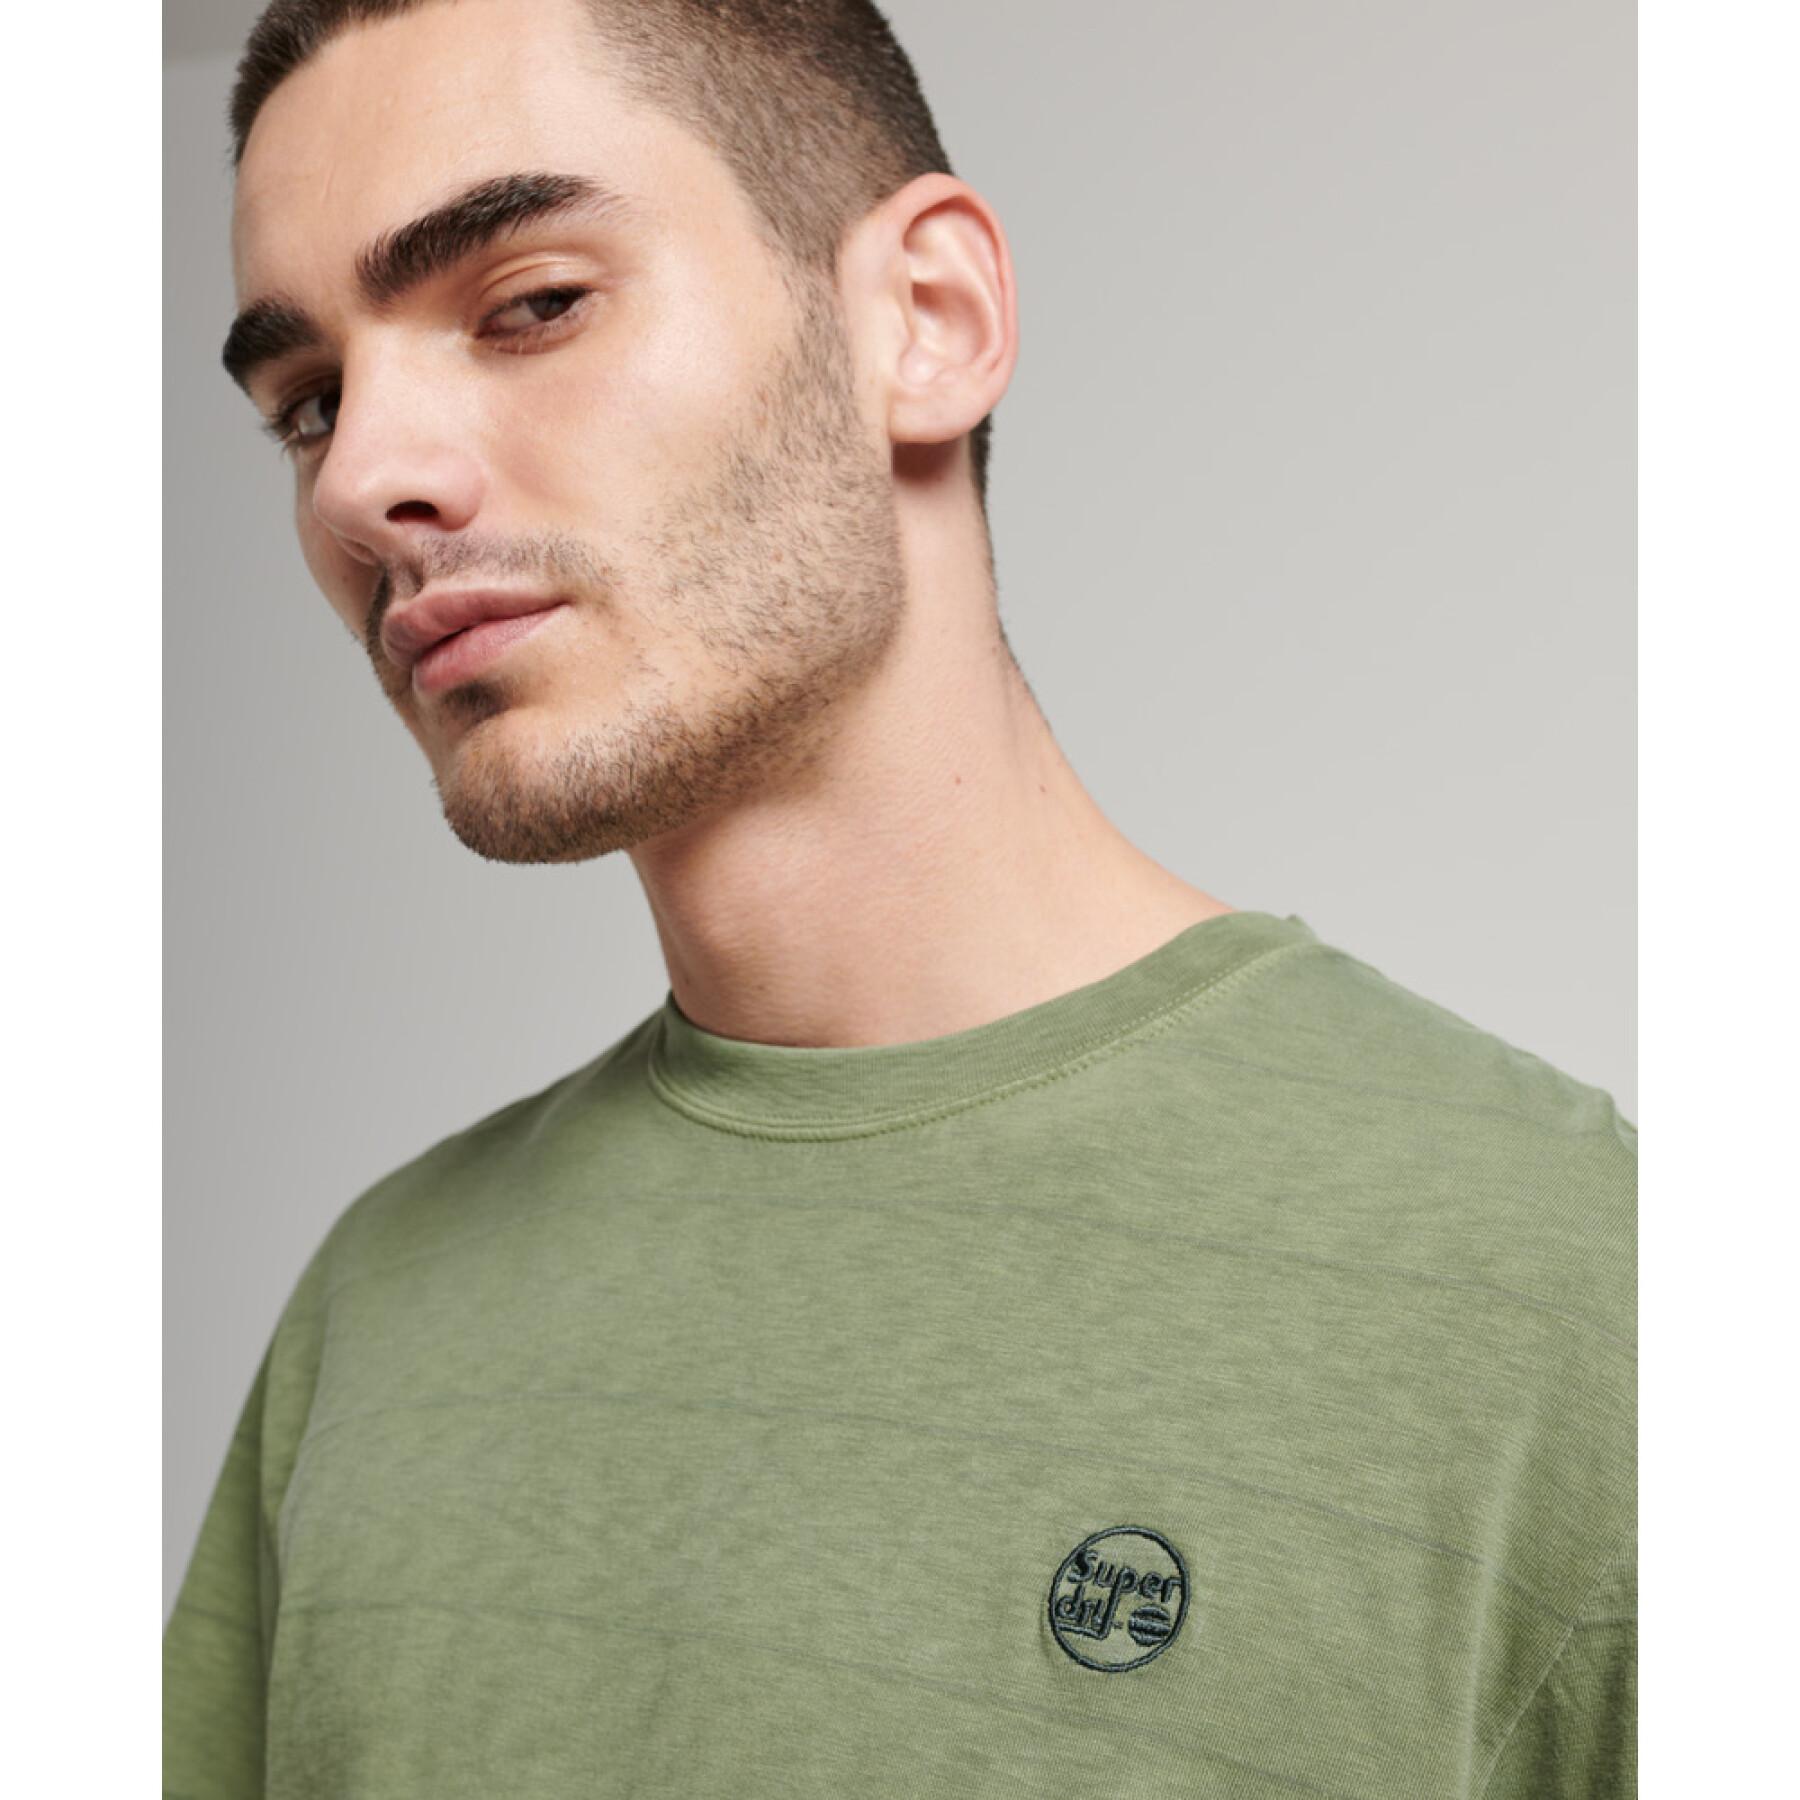 Textured T-shirt in organic cotton Superdry Vintage